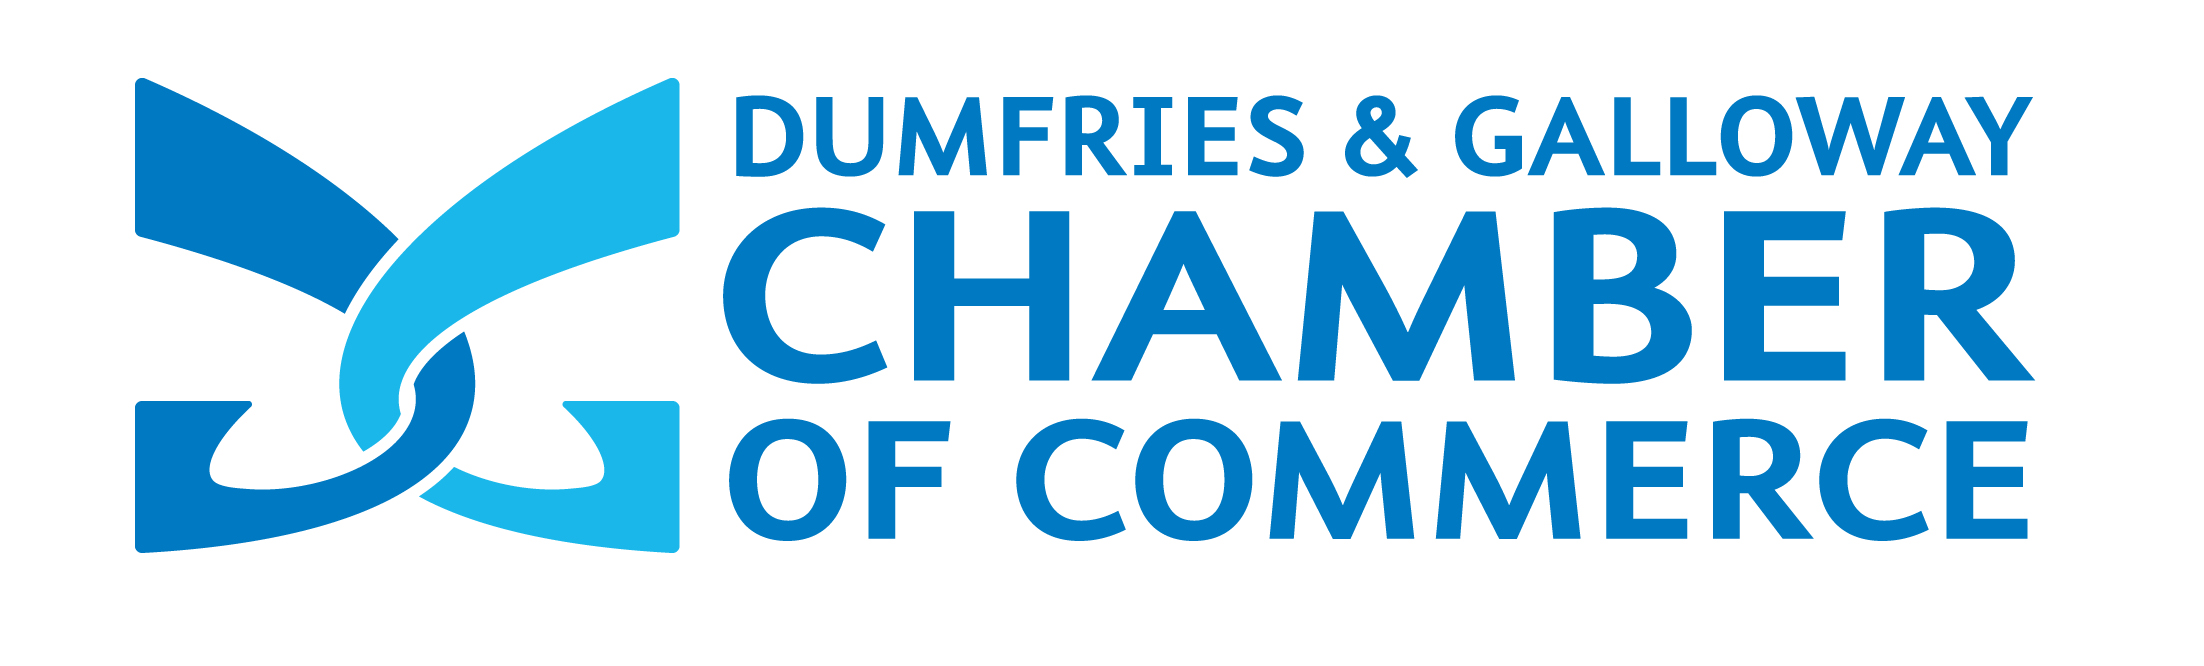 Dumfries Chamber of Commerce